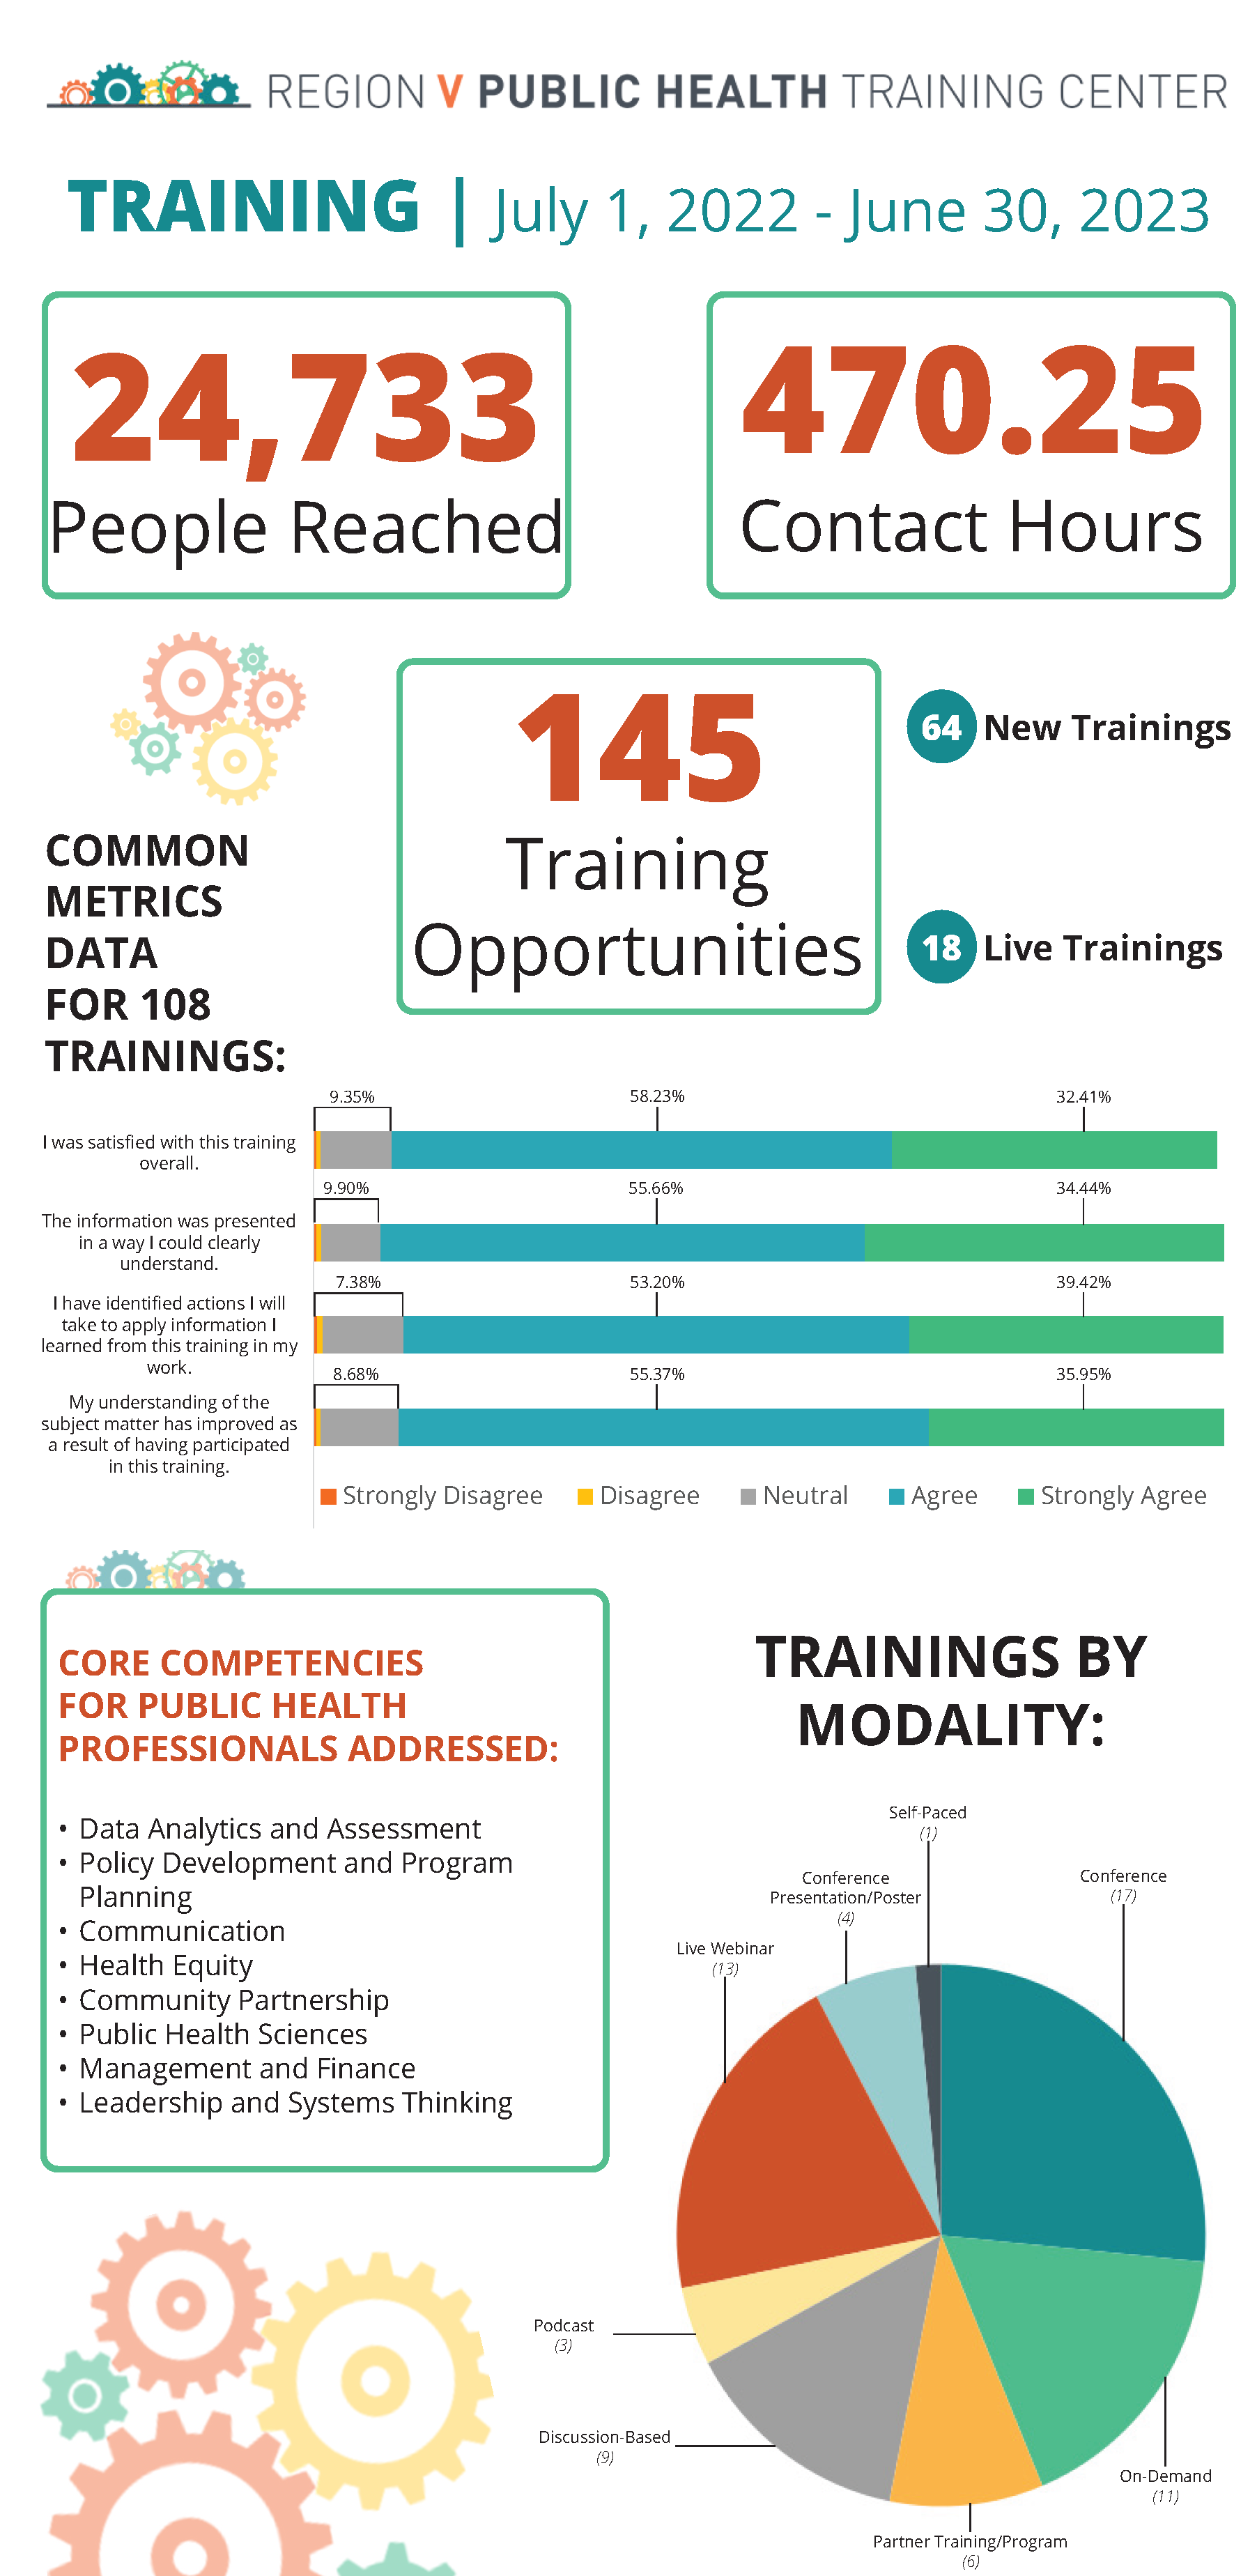 Region V Public Health Training Center TRAINING | July 1, 2022 - June 30, 2023. 24,733 People Reached; 470.25 Contact Hours; 145 Training Opportunities; 64 New Trainings; 18 Live Trainings. Common Metrics Data for 108 Trainings: I was satisfied with this training overall (90.64% Agree or Strongly Agree); The information was presented in a way I could clearly understand (90.1% Agree or Strongly Agree); I have identified actions I will take to apply information I learned from this training to my work (92.62%); My understanding of the subject matter has improved as a result of having participated in this training (91.32%). CORE COMPETENCIES FOR PUBLIC HEALTH PROFESSIONALS ADDRESSED: • Data Analytics and Assessment • Policy Development and Program Planning • Communication • Health Equity • Community Partnership • Public Health Sciences • Management and Finance • Leadership and Systems Thinking. TRAININGS BY MODALITY: Live Webinar (13), Conference Presentation/Poster (4), Self-Paced (1), Conference (17), On-Demand (11). Partner Training/Program (6), Discussion-Based (9), Podcast (3).